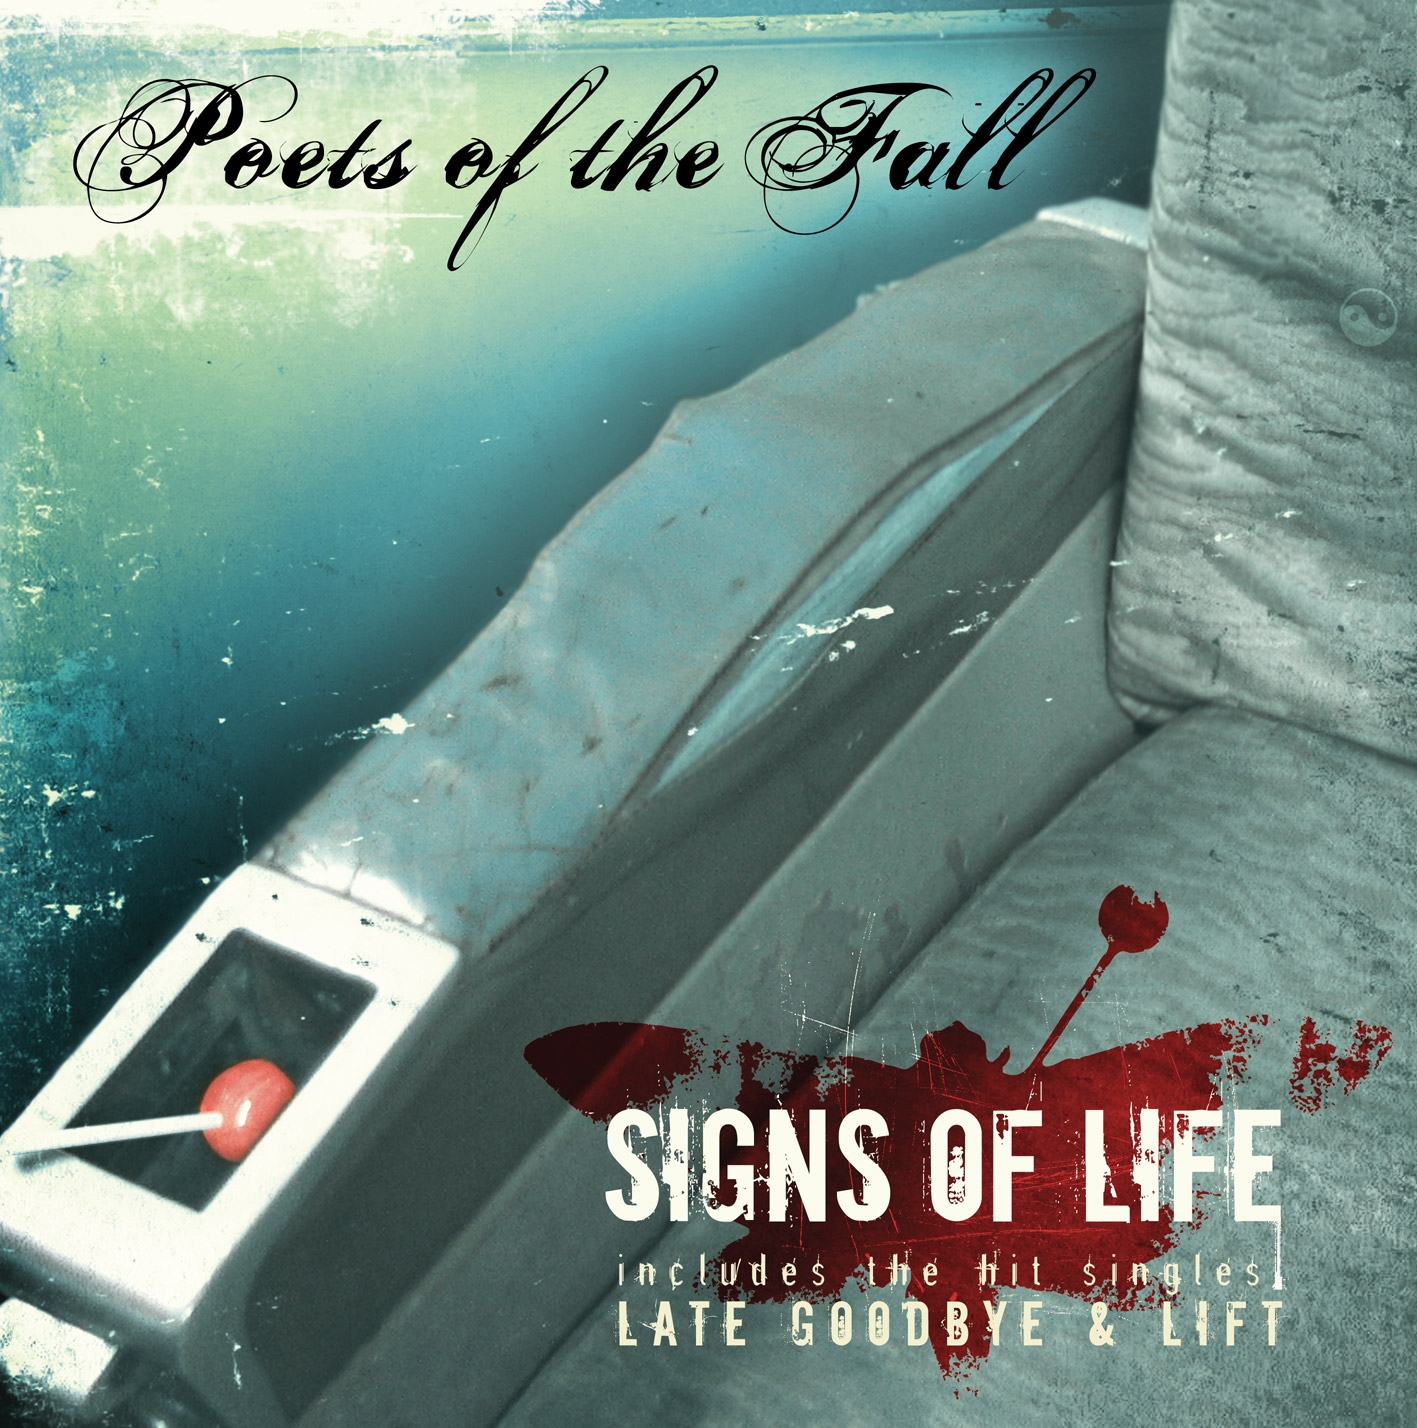 Poets of the Fall - Signs Of Life - CD